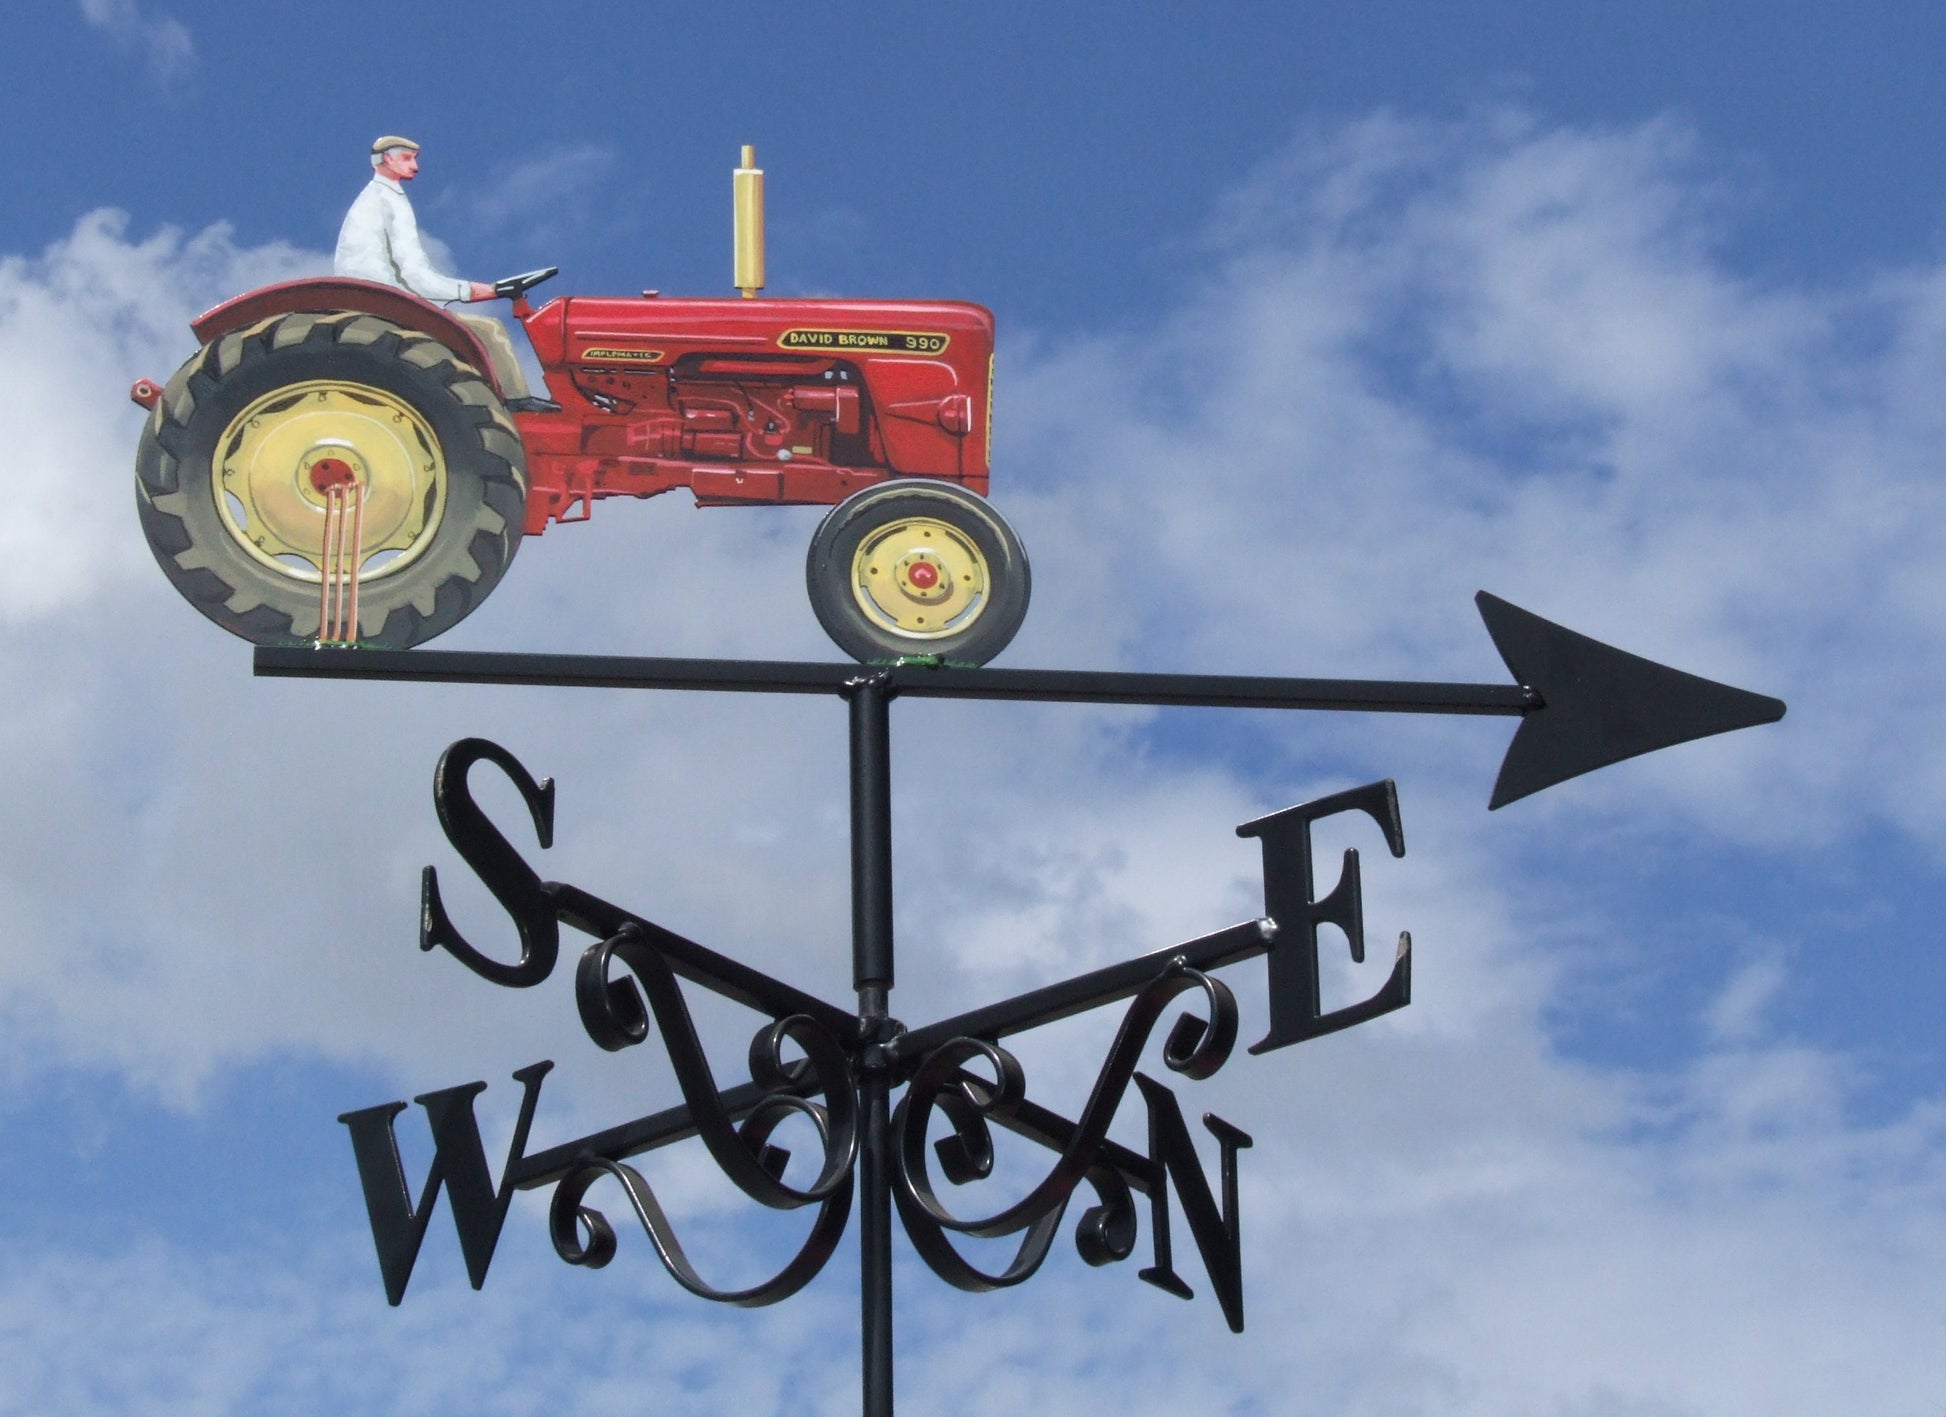 A red David brown tractor with a man and cricket stumps artist painted weather vane right side